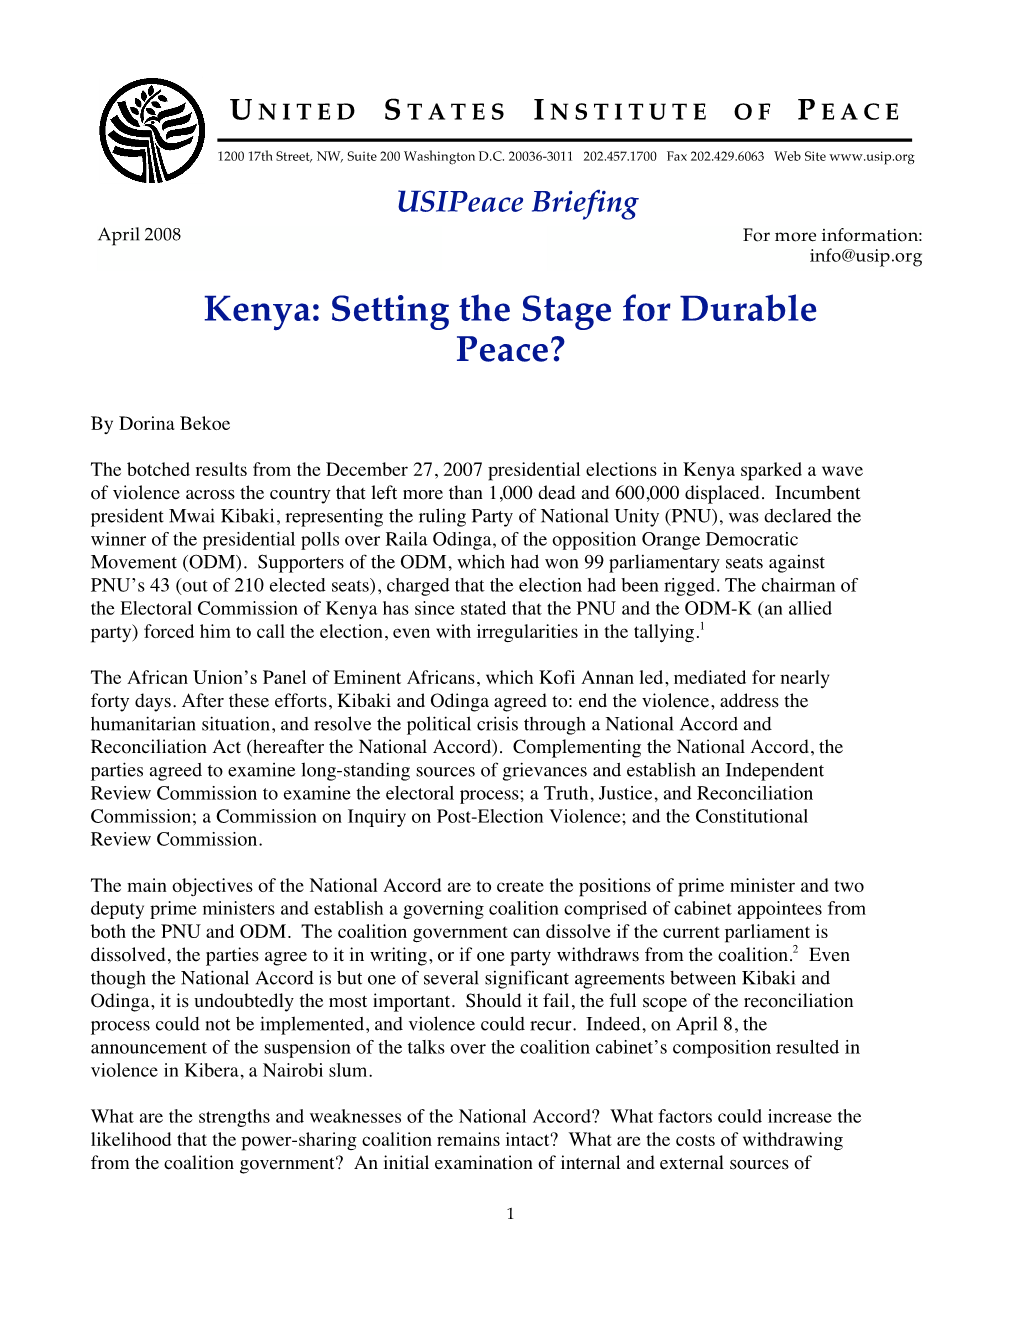 Kenya: Setting the St Age for Durable Peace?